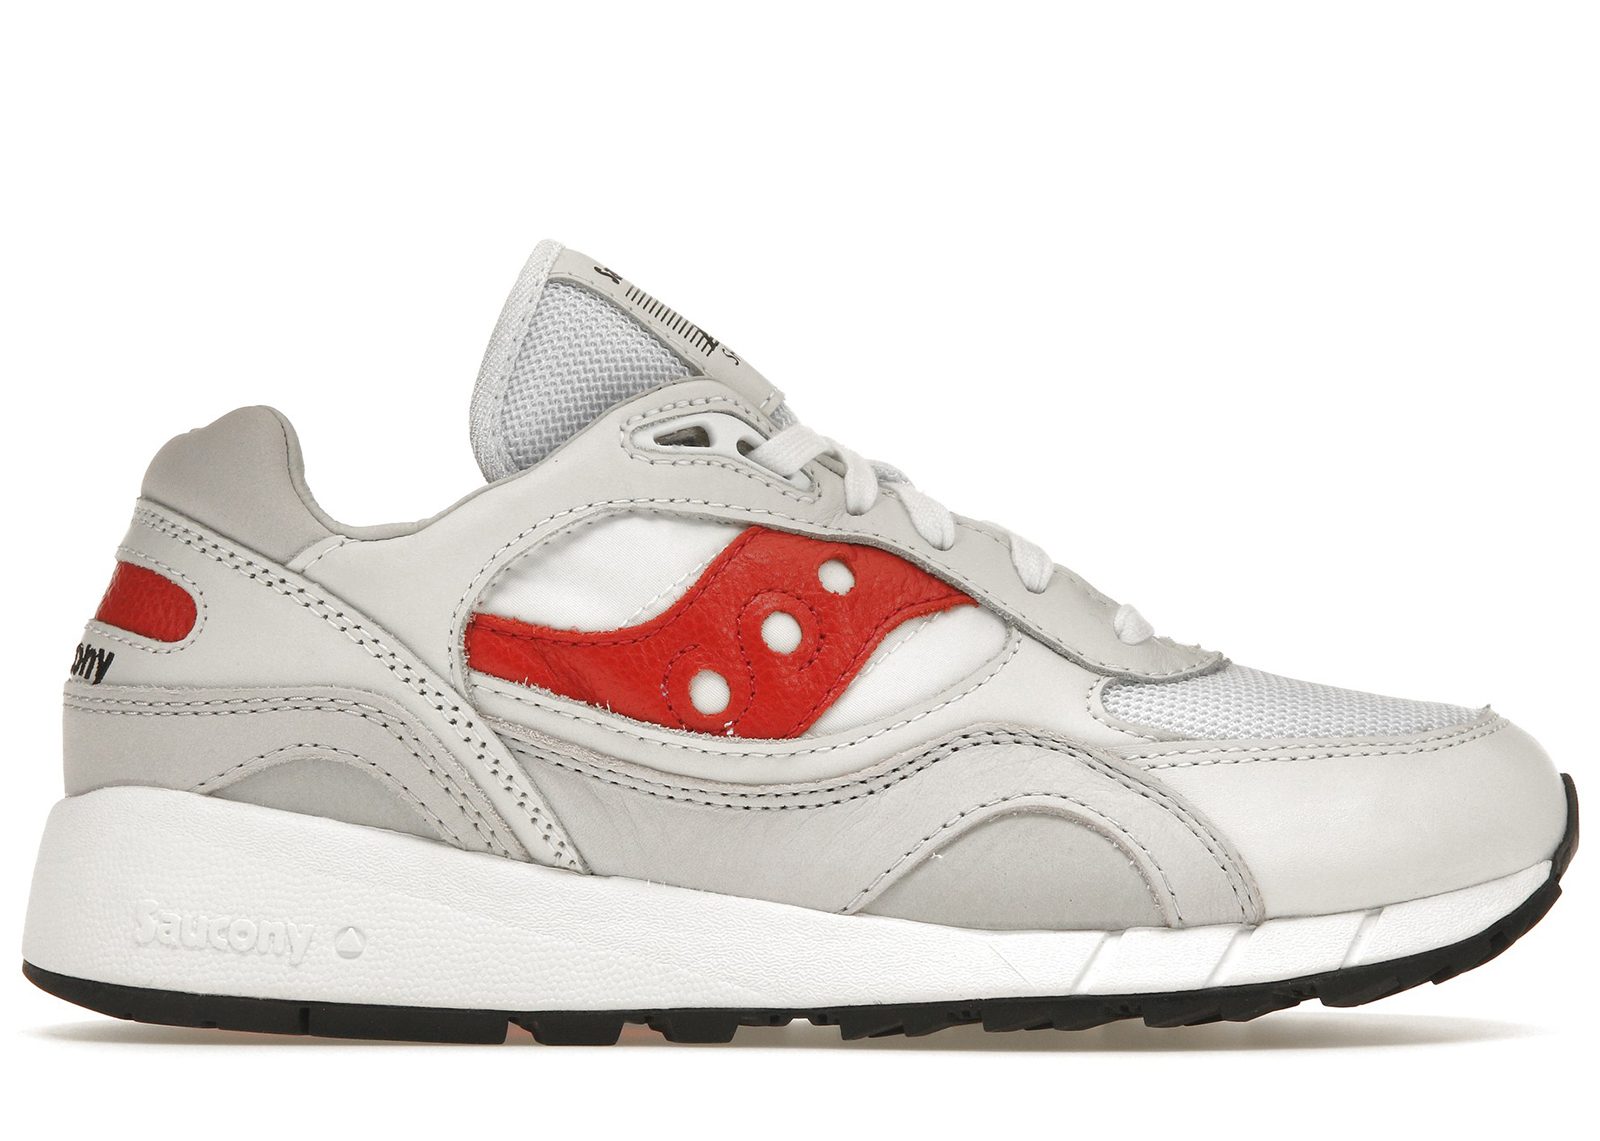 Saucony Shadow 6000 White Red Men's - S70668-2 - US